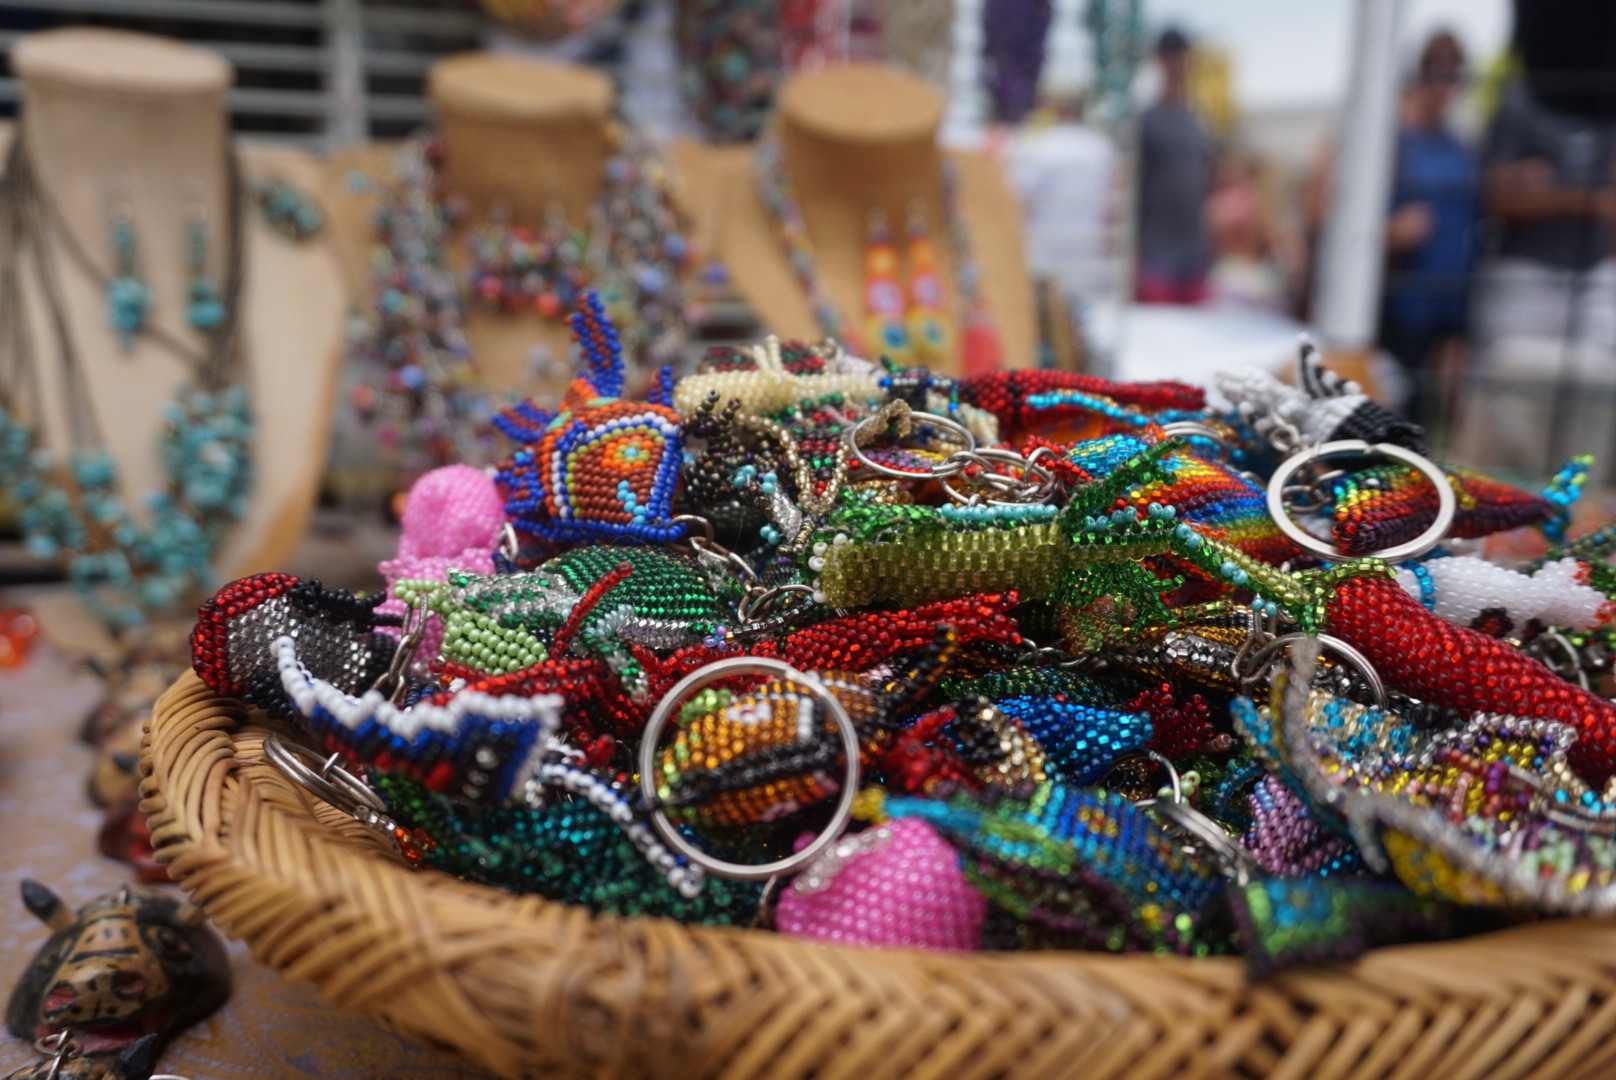 Jewelry, beaded charms and embroidered pieces made up a selection of goods available at Salt Life Fest’s maze of markets